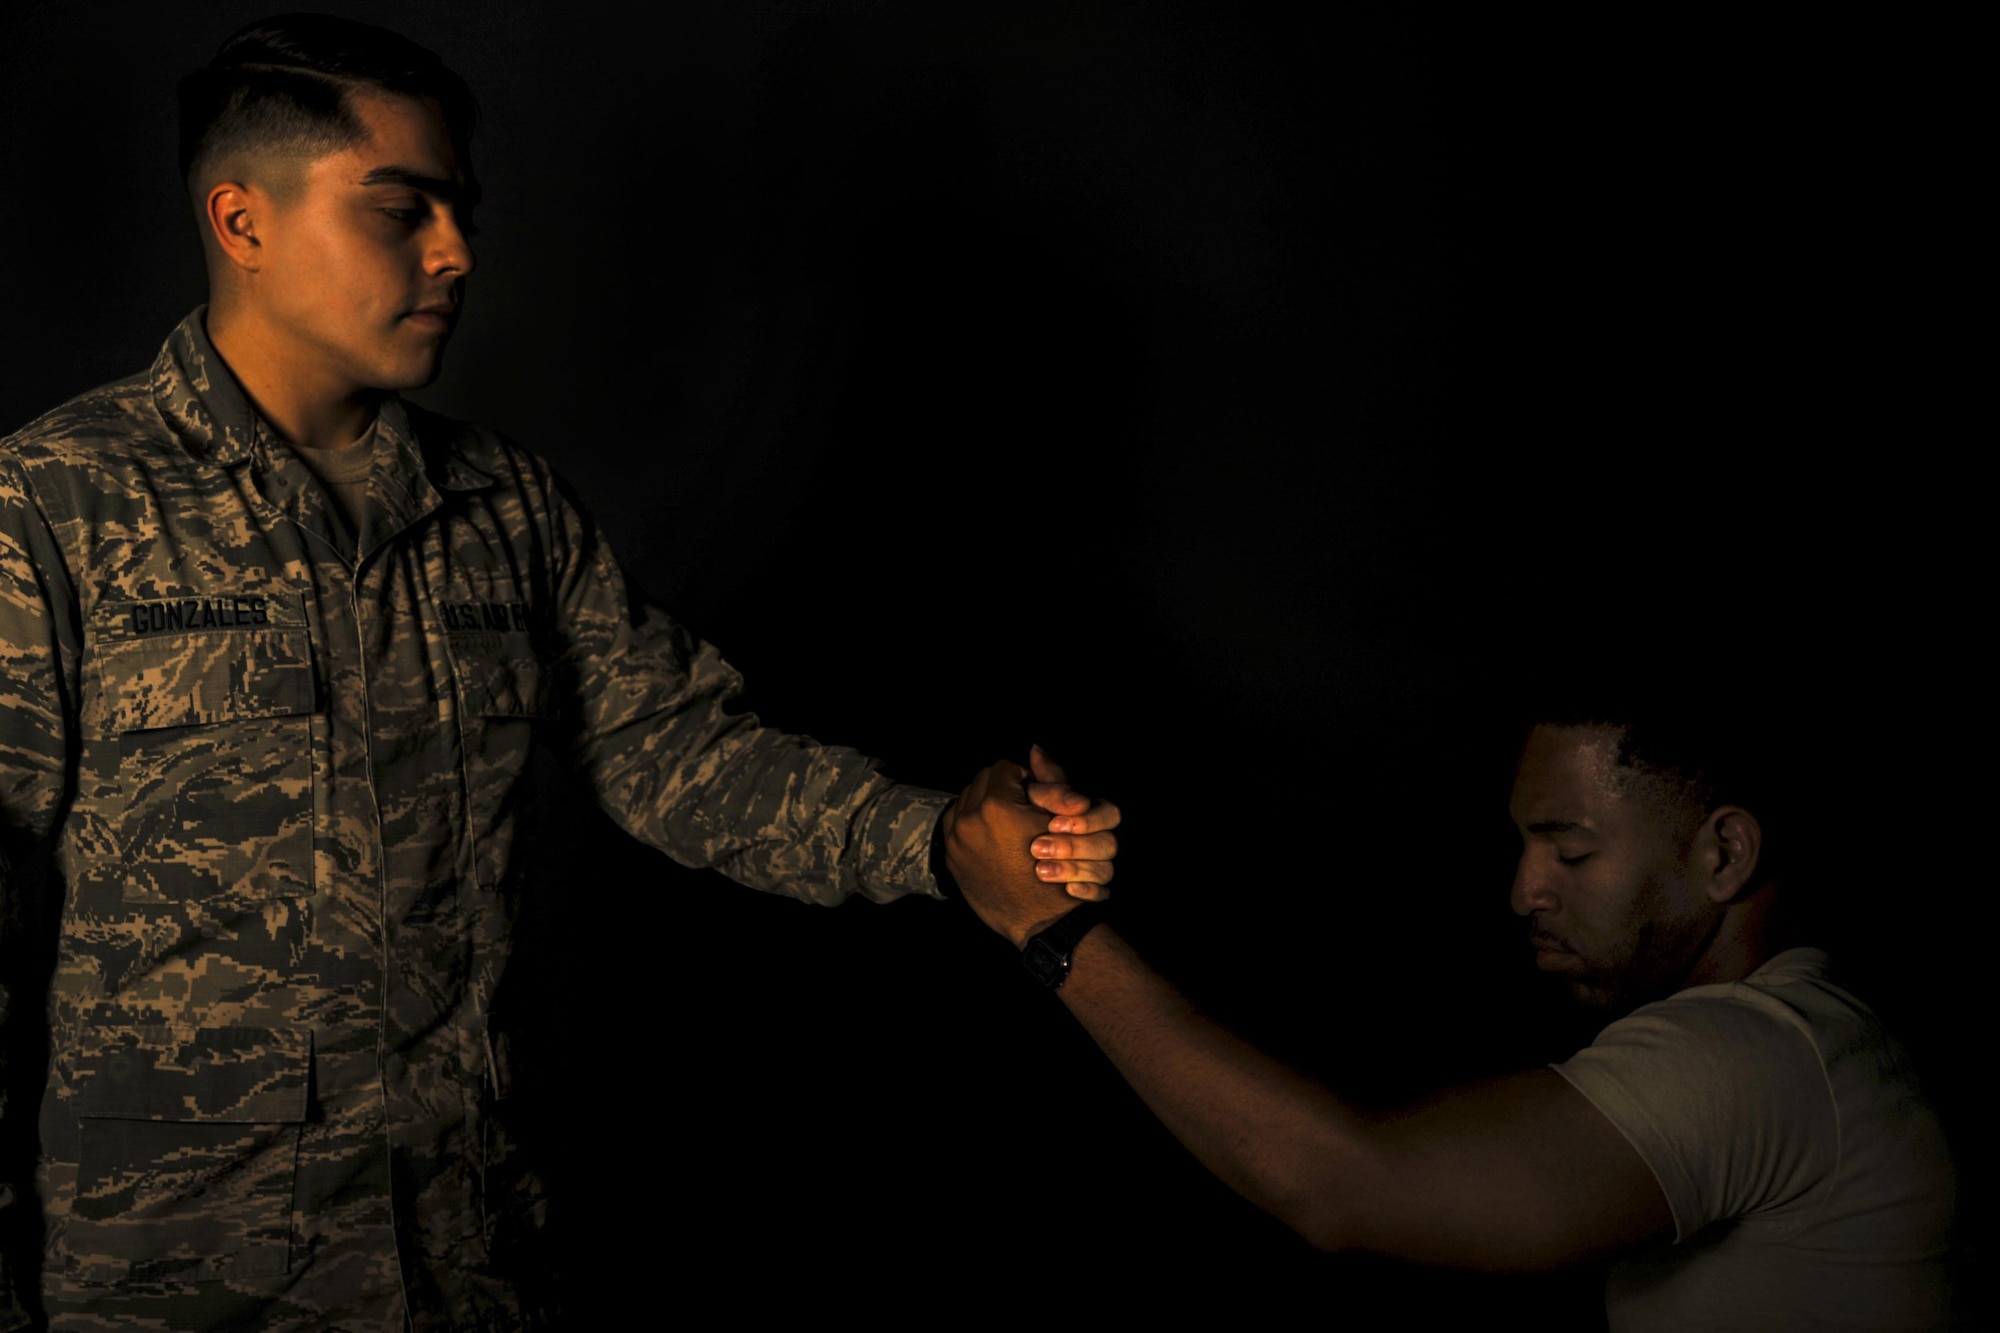 U.S. Air Force Airman Cassidy Gonzales, 23d Medical Operations Squadron mental health technician, grips the hand of Airman Giancarlo Carter, 23d Wing broadcast journalist apprentice, Aug. 31, 2016, at Moody Air Force Base, Ga. Since September is National Suicide Prevention Awareness Month, Air Force leadership takes this time to remind Airmen about the power of wingmanship and emphasize the resources available to combat hard times. (U.S. Air Force photo by Airman 1st Class Daniel Snider)